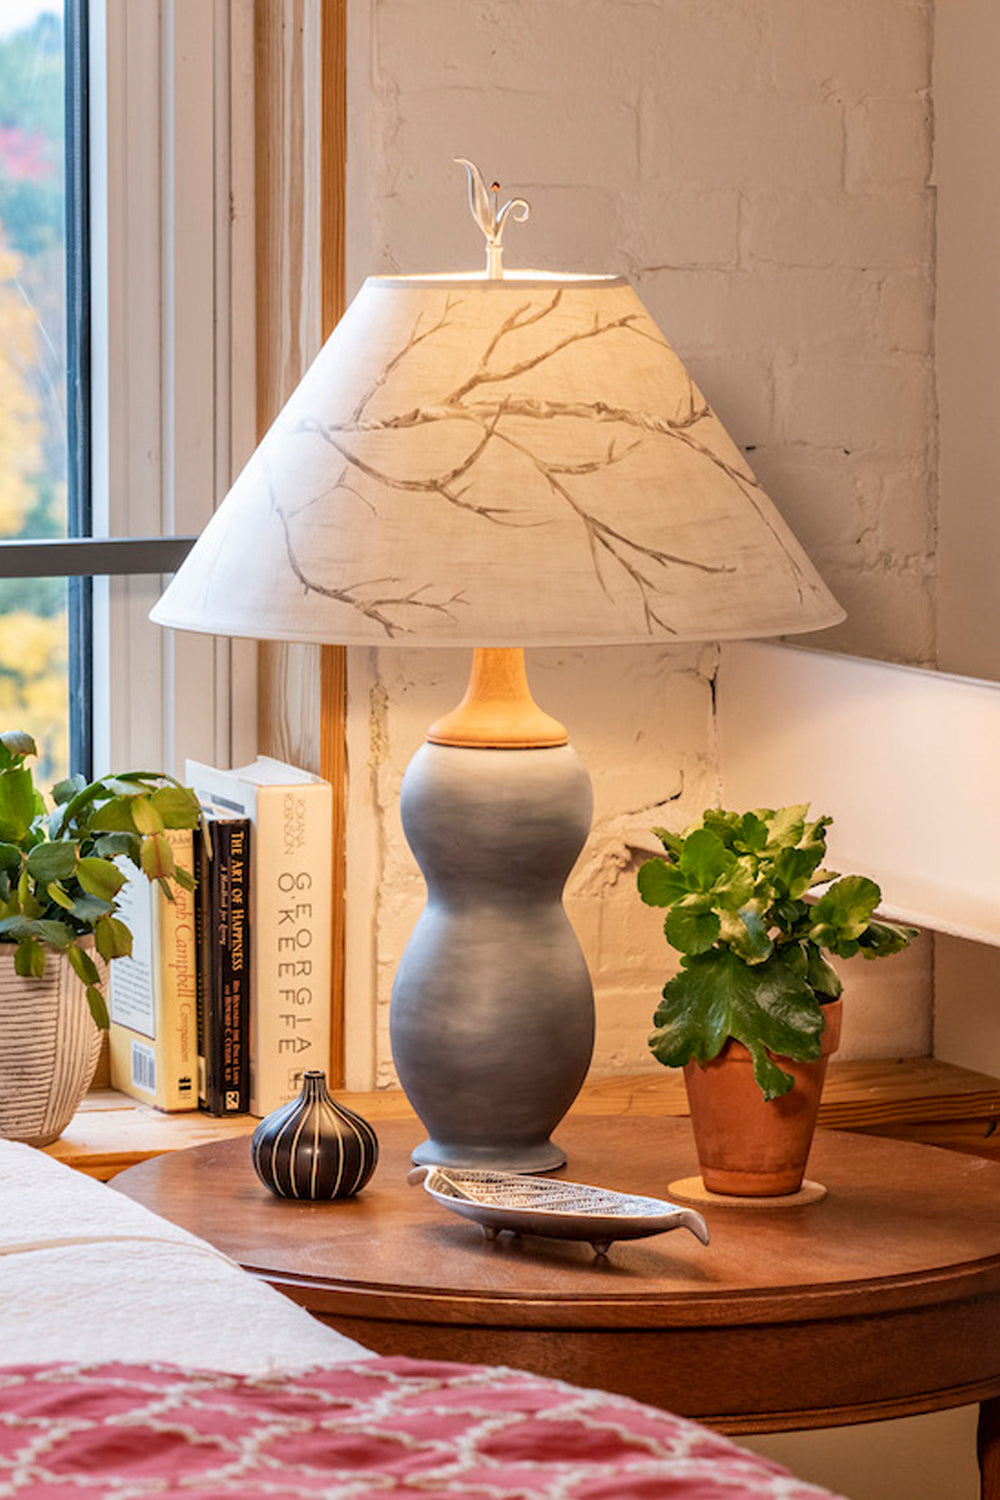 Janna Ugone & Co Table Lamp Ceramic & Maple Table Lamp with Large Conical Shade in Sweeping Branch